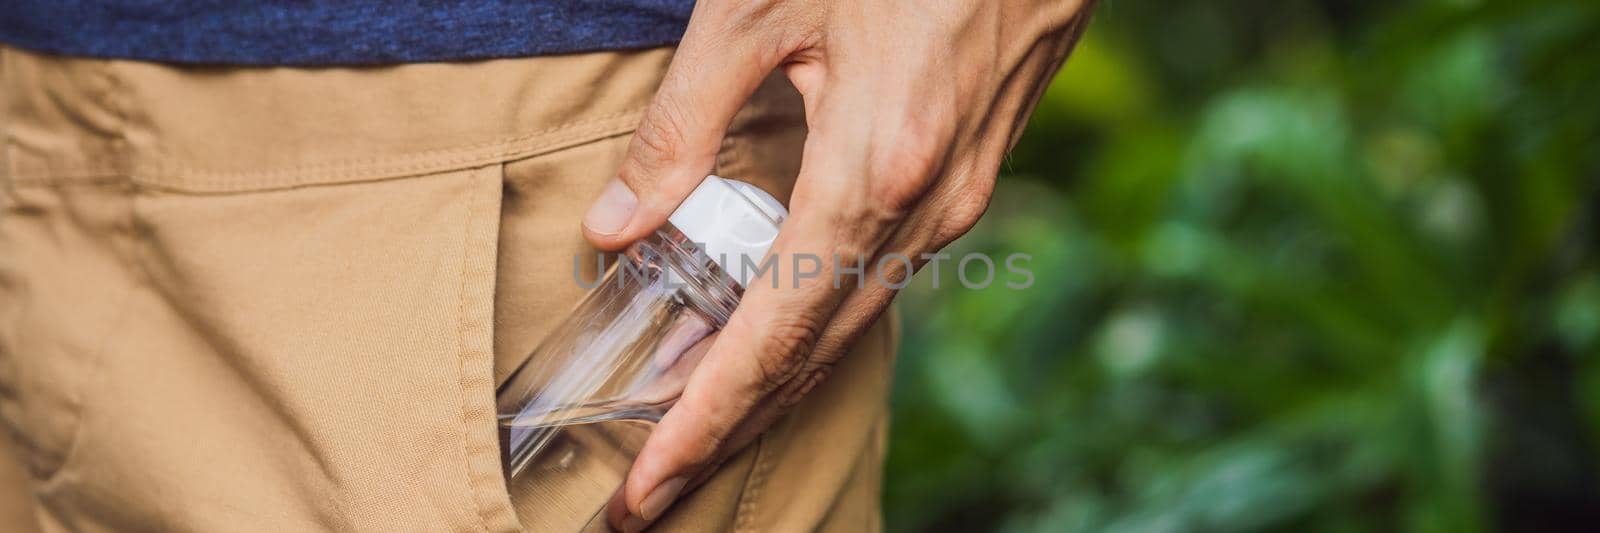 man put a hand sanitizer gel into his trouser pocket when he is going to go outside during corovid -19 outbreak crisis, take care of personal health BANNER, LONG FORMAT by galitskaya